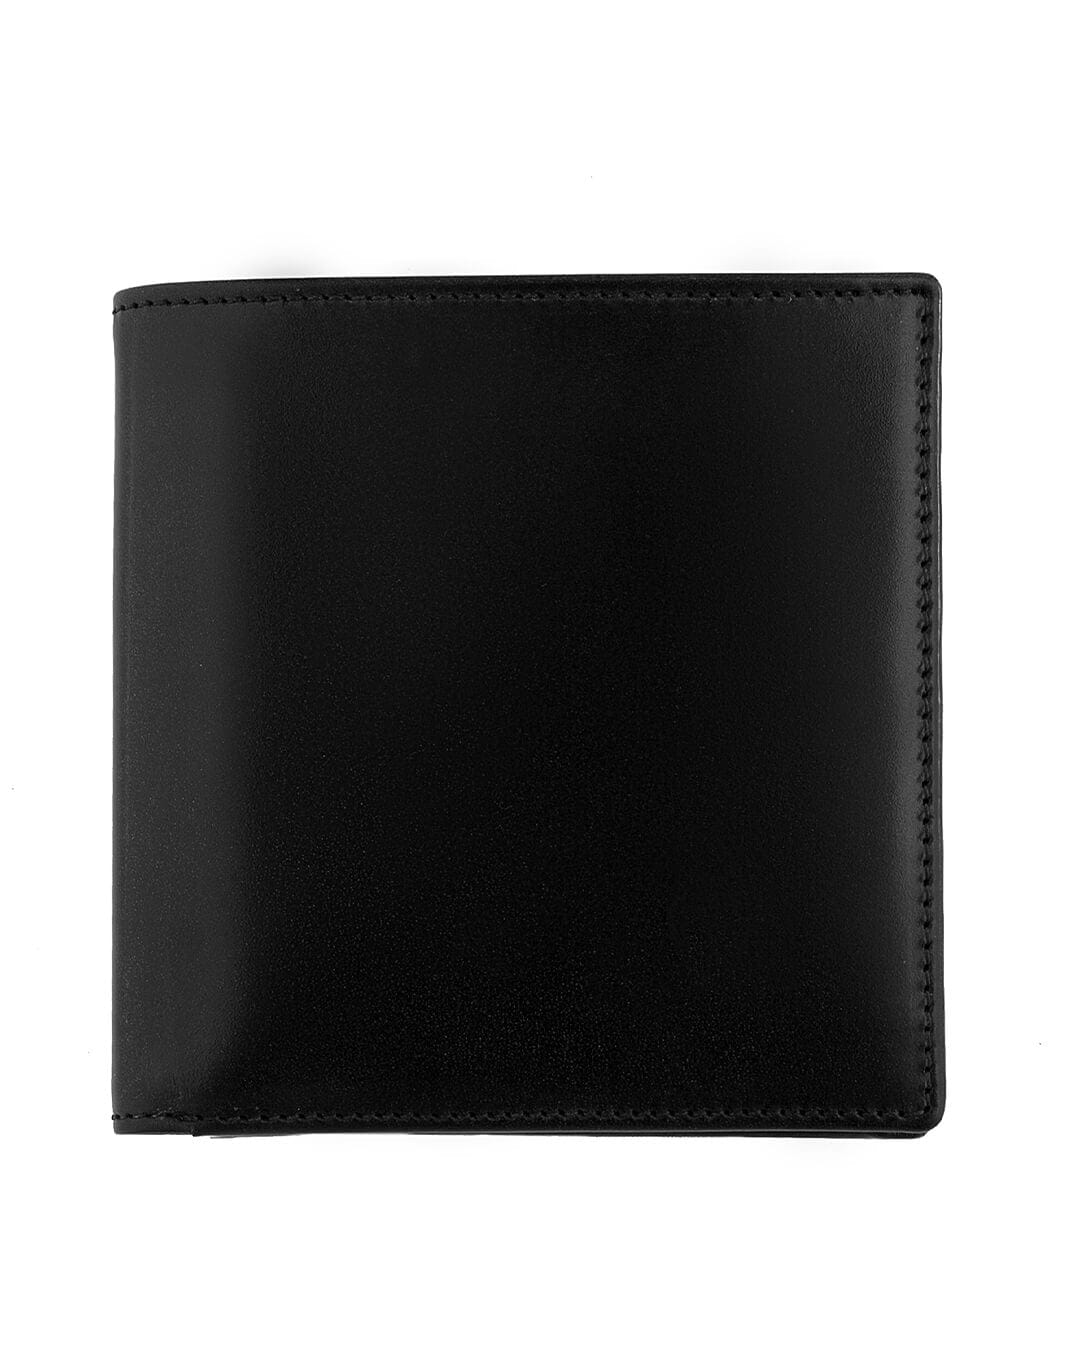 Cavesson&#39;s Wallets Cavesson&#39;s Black And Olive Coin Wallet